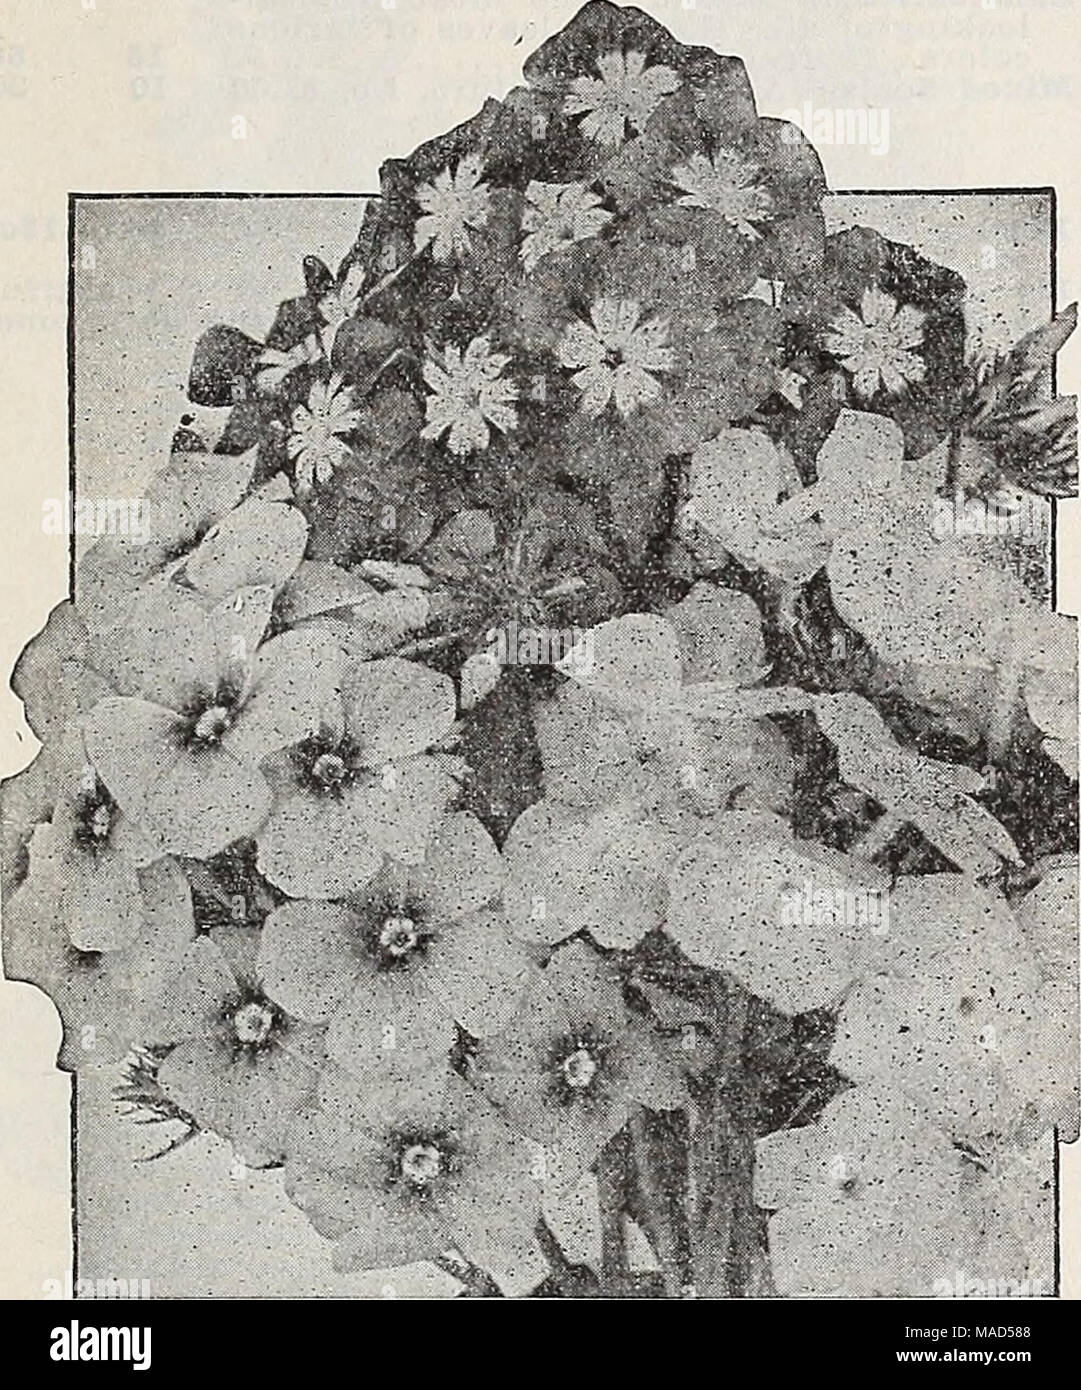 . Dreer's wholesale catalog for florists : winter - spring - summer 1938 . Phlox Drummondi grandiflora Phlox Drummondi grandiflora These are fine summer-flowering annuals and make excellent pot plants for spring sales. The grandiflora varieties are noted for their lovely large blooms which are arranged in truly giant trusses and there is a con- tinuous display of color from early summer until late fall. The colors we list have all been chosen for their purity and charm. Tr. pkt. Oz. Bright Bose $0 25 $1 00 Brilliant. Blush rose, with crimson eye. Piery Scarlet Primrose (Isabellina) Shell Pink  Stock Photo